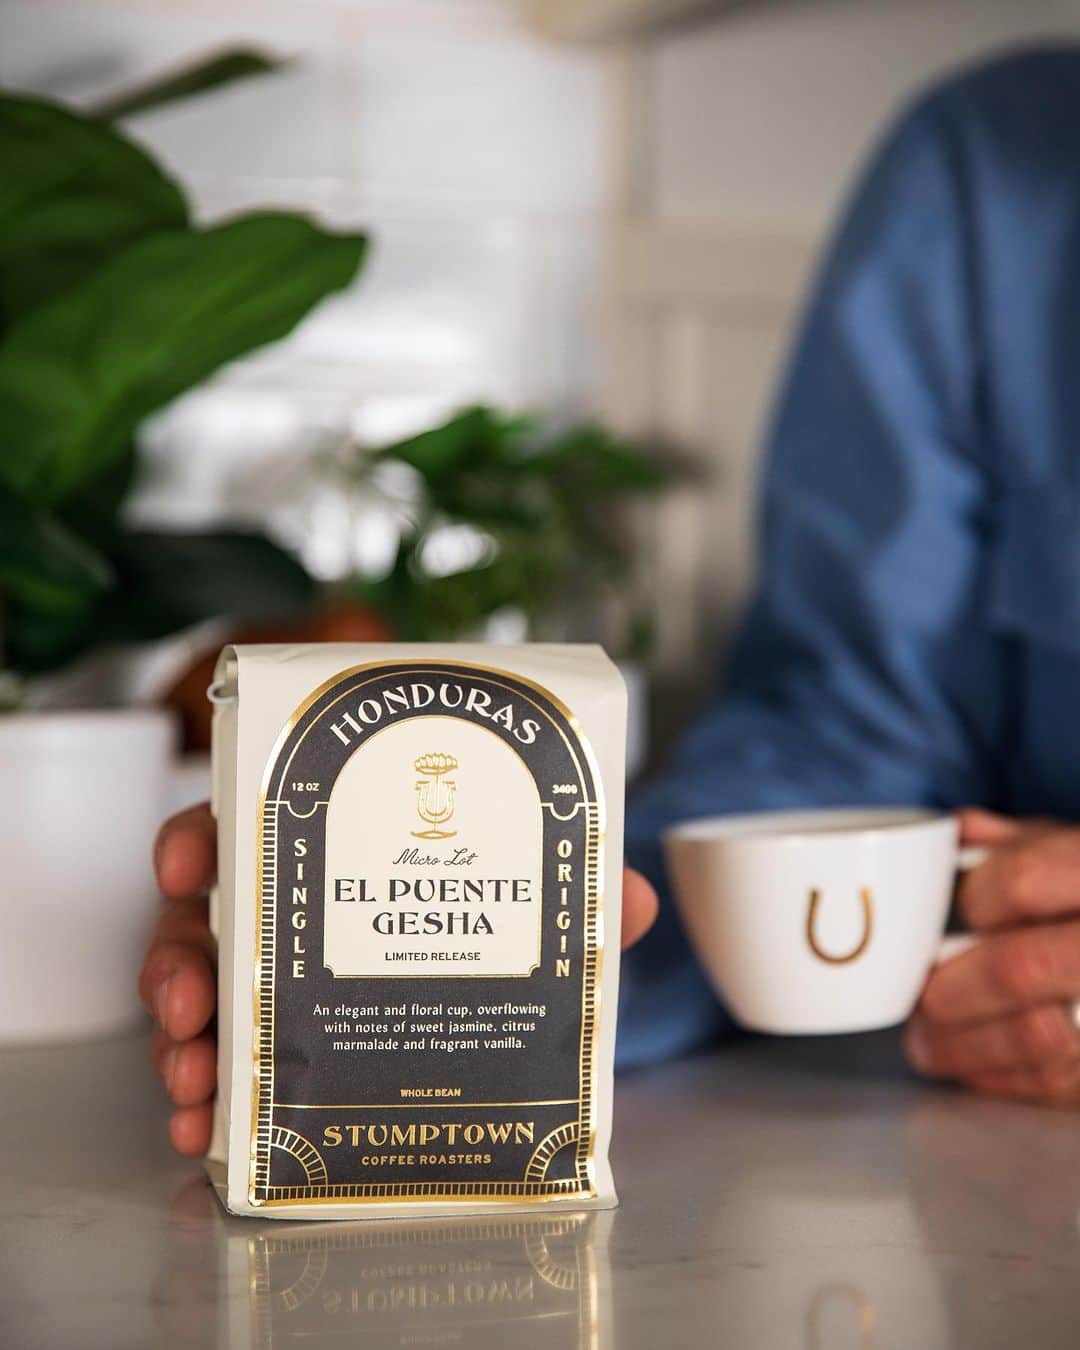 Stumptown Coffee Roastersのインスタグラム：「If you’re not familiar with El Puente Gesha, you might wonder what all the excitement is about.   For many, Gesha is the most coveted coffee variety—renowned for its quality, unique sweetness, and elegant floral notes.    The story of Honduras El Puente Gesha goes something like this: In 2006, our founder visited coffee producers Moisés and Marysabel at Finca El Puente with a handful of Gesha seeds in his pocket.   Not only did Finca El Puente have the right growing conditions this famously finicky variety needed to thrive, but Moisés and Marysabel also had the dedication, curiosity, and attention to detail required to coax out its full potential in the cup.	  It's truly a labor of love, and this year's Gesha offering is pure elegance with notes of sweet jasmine, citrus marmalade, and fragrant vanilla. ✨   It's extremely limited, so act fast to place dibs on yours before it’s too late.」